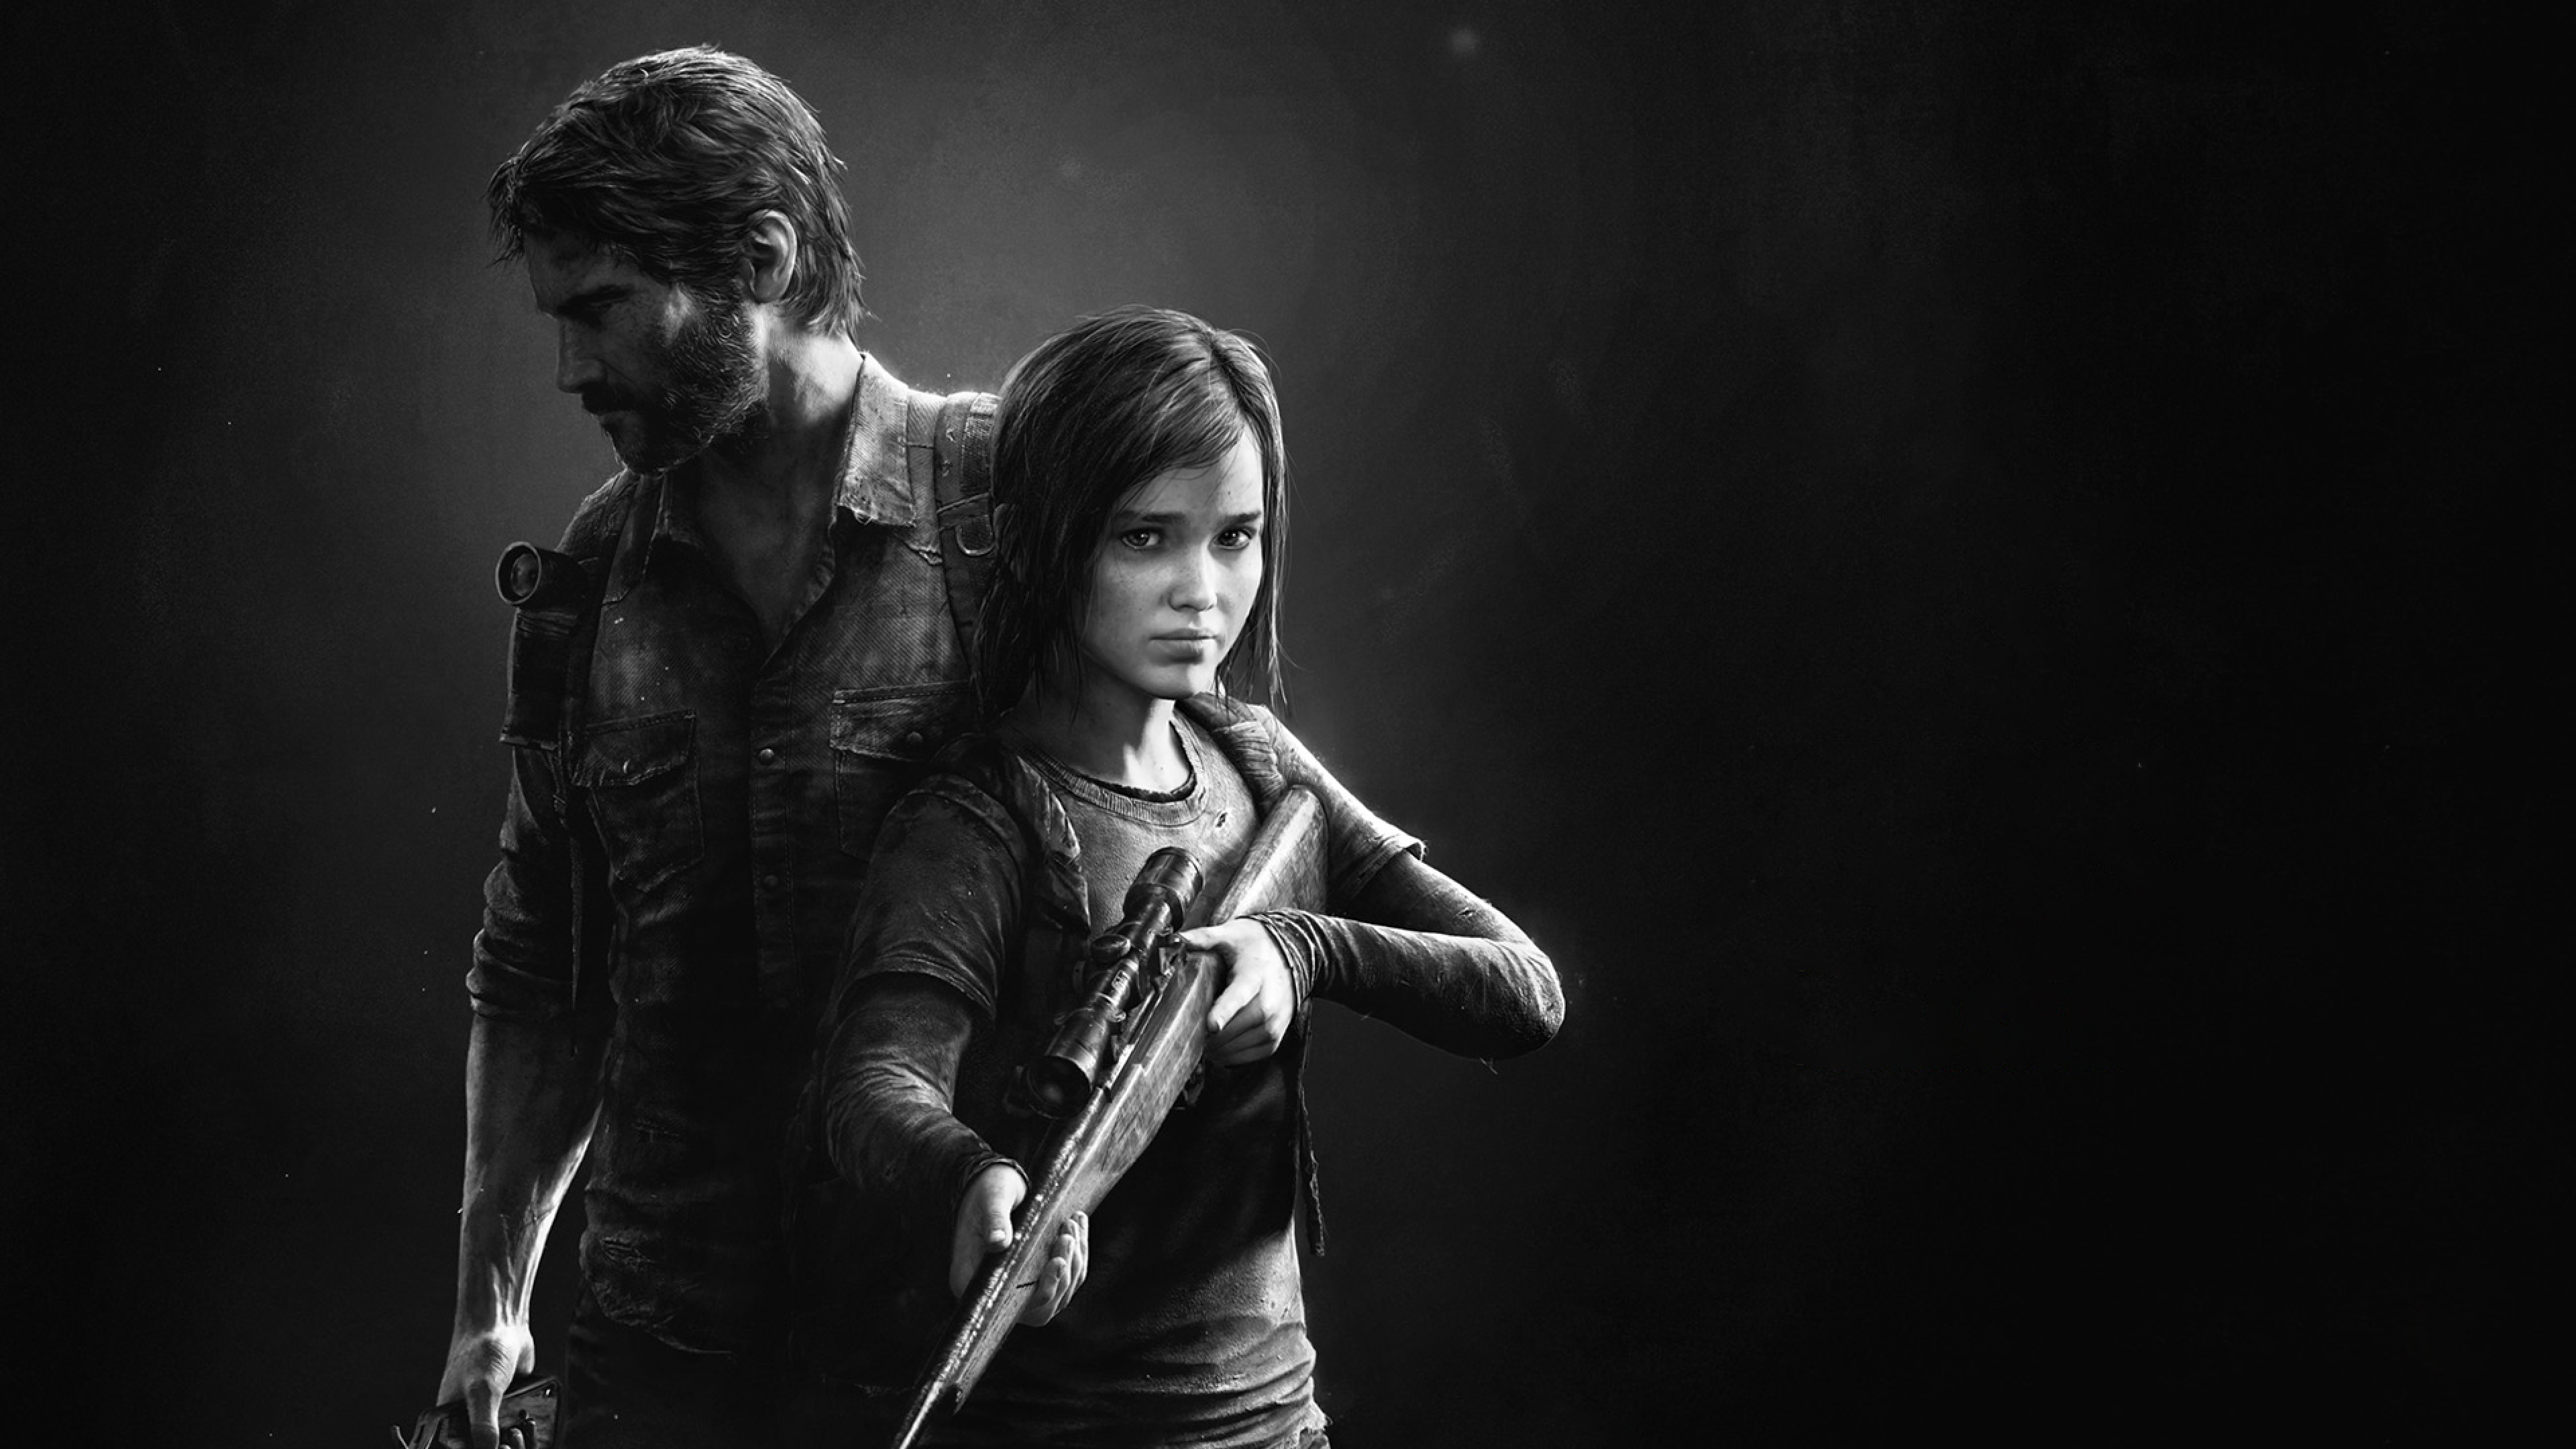 download free the last of us part 2 remastered